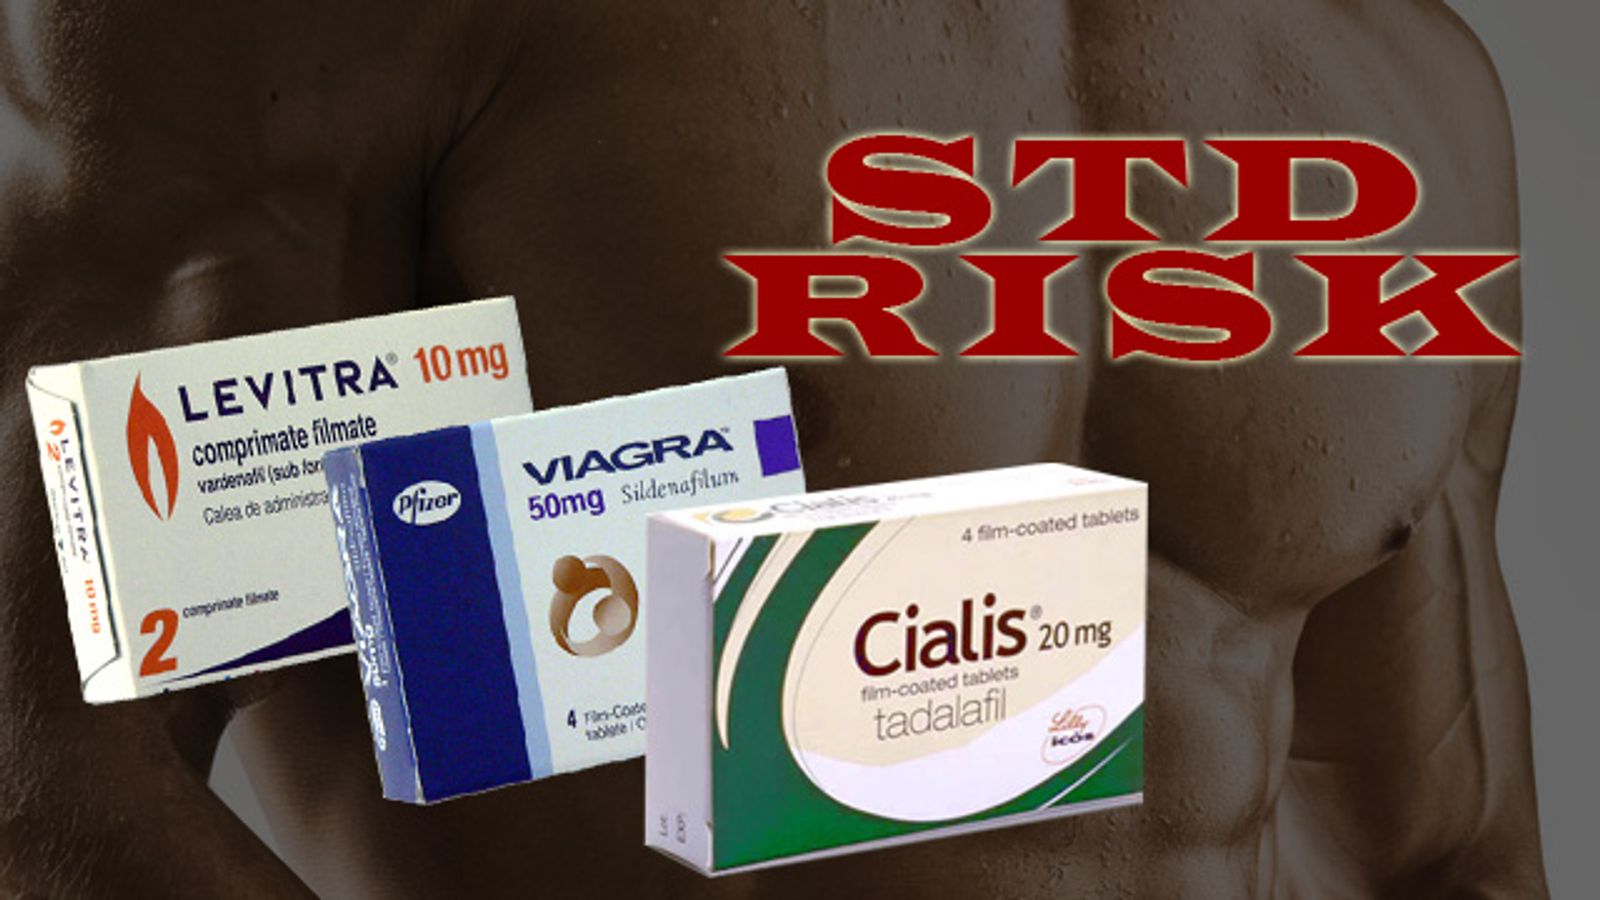 Study: STDs More Prevalent in Men Over 40 Using ED Drugs